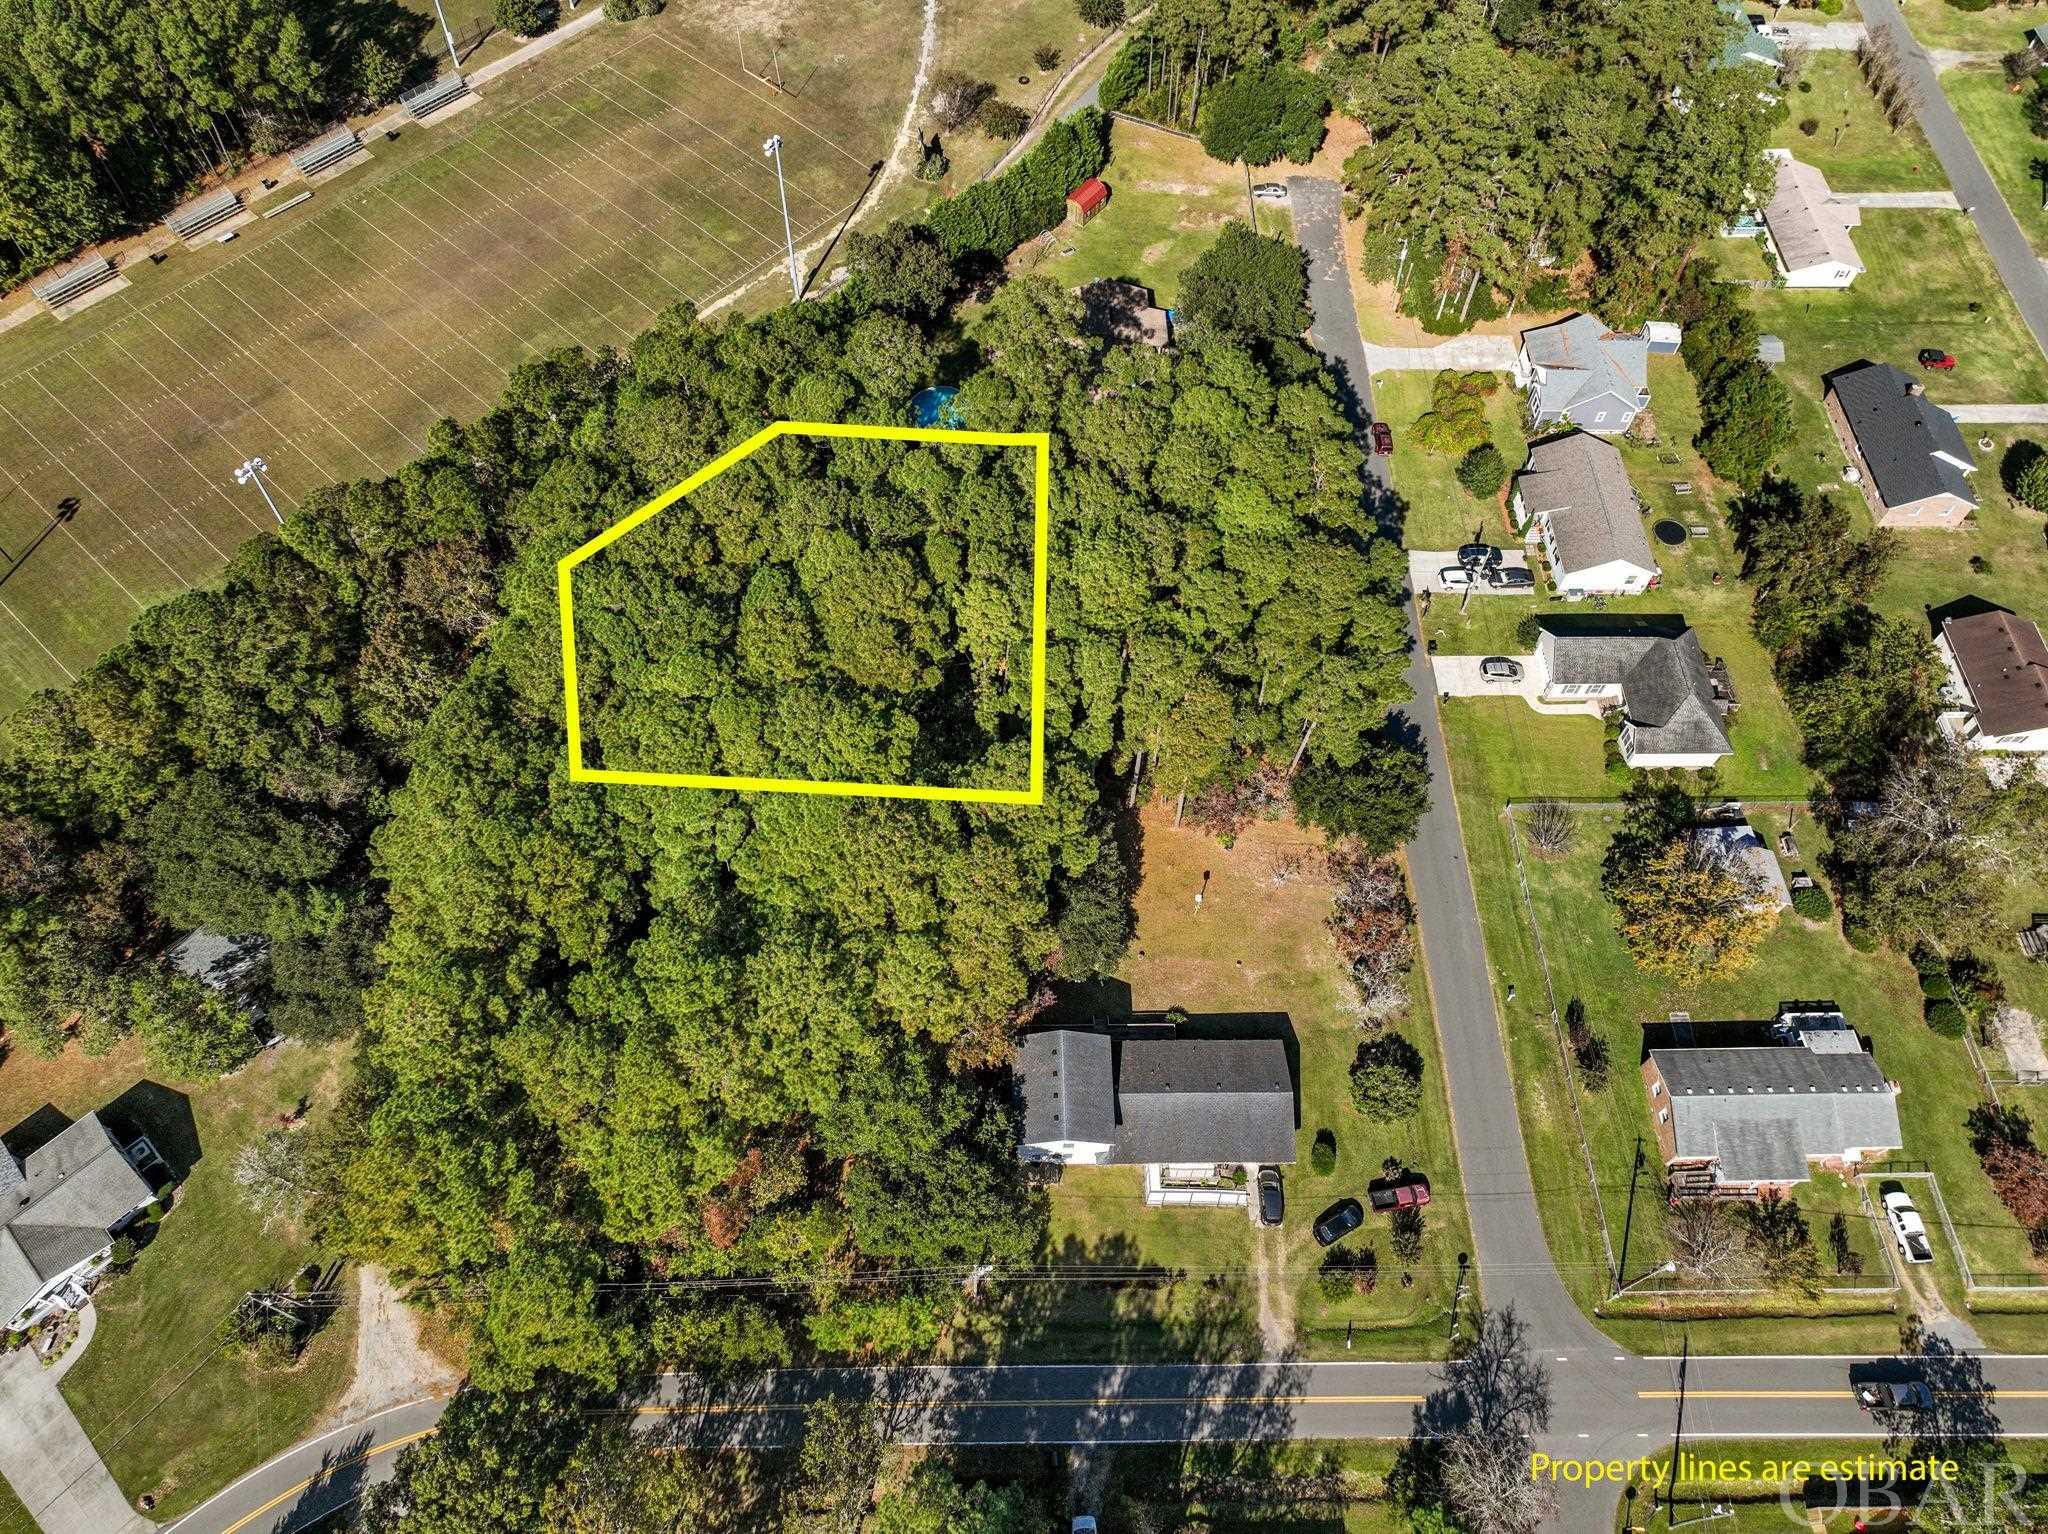 Located in the welcoming island town of Manteo on Roanoke Island, this undeveloped (X flood zone) lot offers an opportunity for those seeking a piece of land in a picturesque waterfront town. The historic Manteo downtown area is within easy reach and features a marina, boardwalk, Roanoke Festival Park, community events and more. The true appeal of this property lies in its strategic location near Manteo schools, making the daily school commute straightforward, and situated near local restaurants and shopping, ensuring that everyday essentials and dining options are always a short drive away. Just minutes from Nags Head, a day at the ocean is just minutes away. With the potential to build your own home on this blank canvas, you have the opportunity to design a residence that perfectly suits your lifestyle. This lot is a promising opportunity to craft your ideal island home and become a part of the Manteo community.